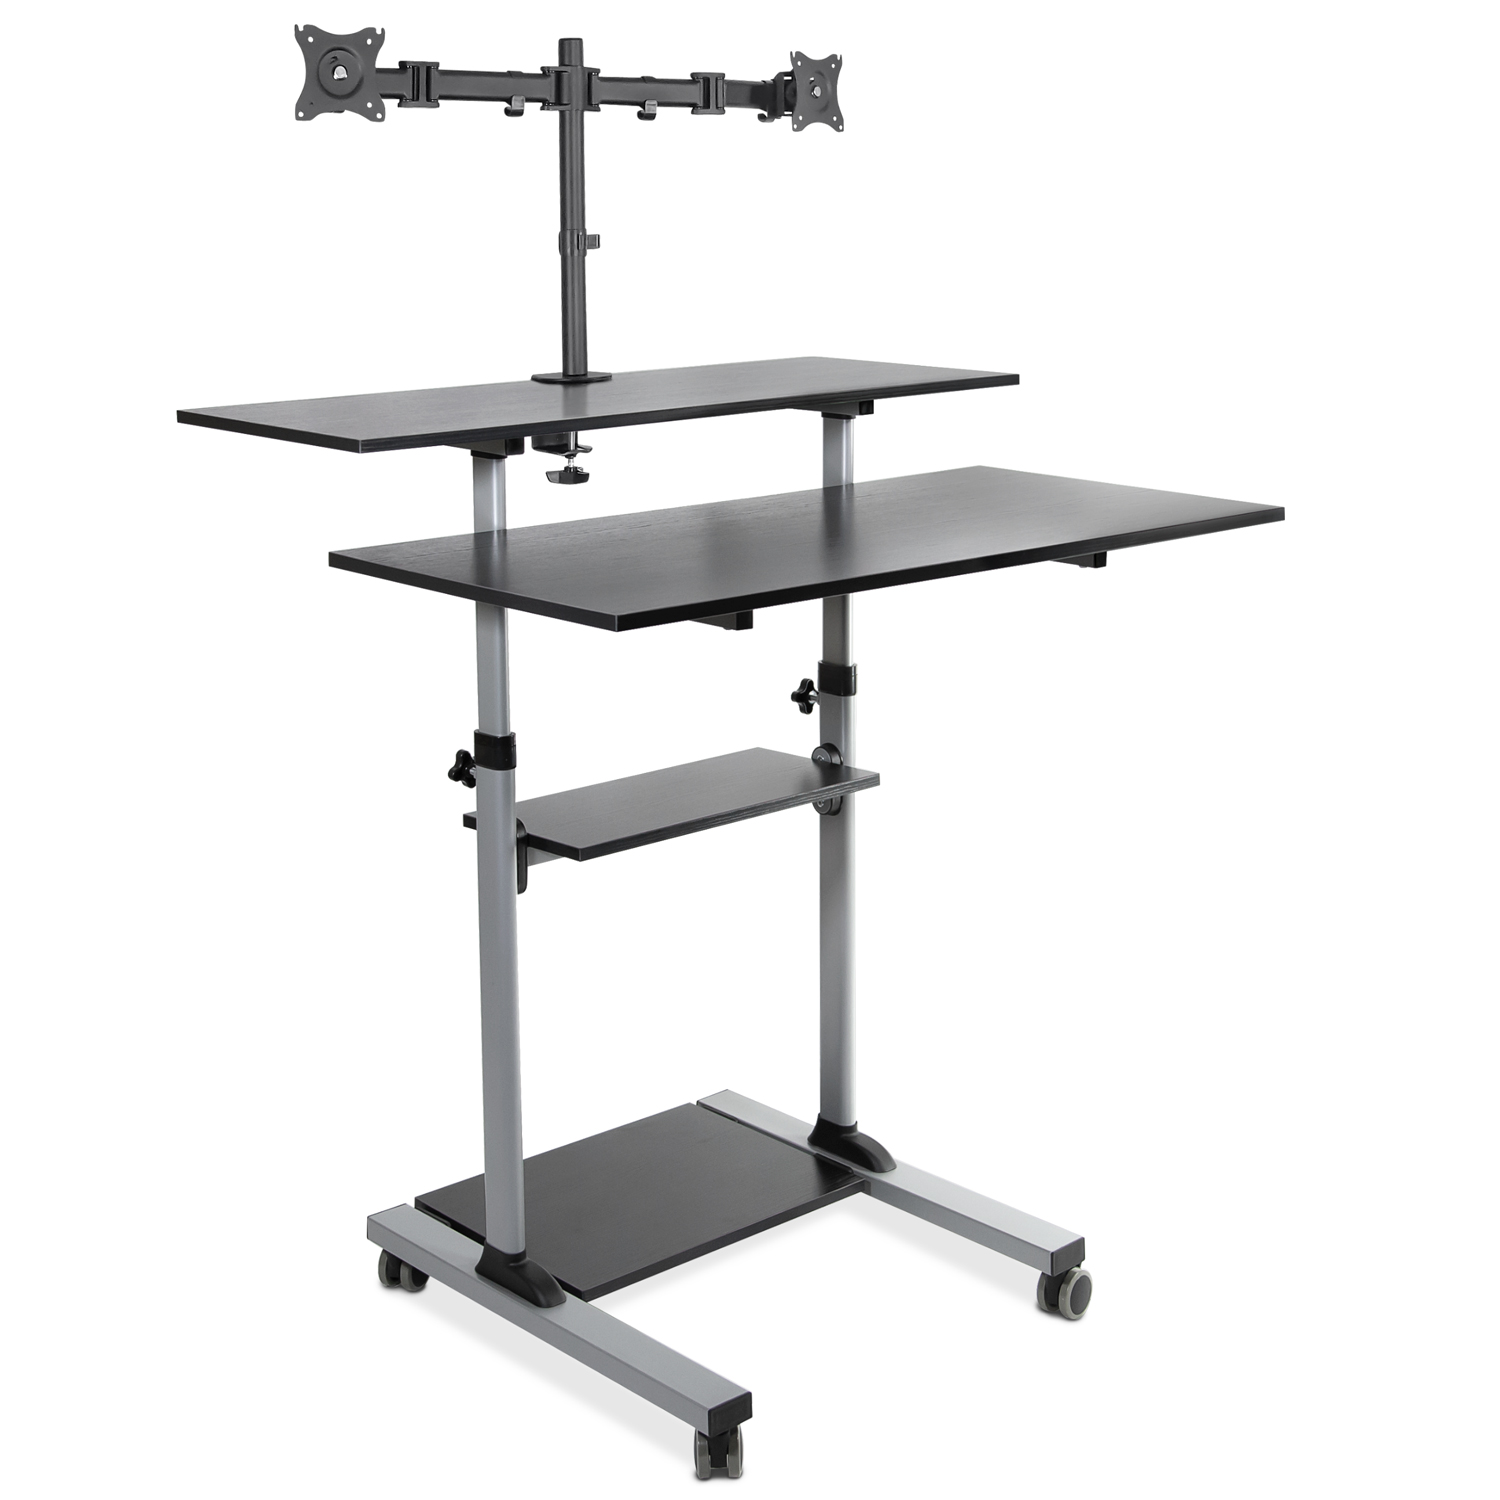 Large Height Adjustable Rolling Stand up Desk with Monitor Mount by Mount-It!